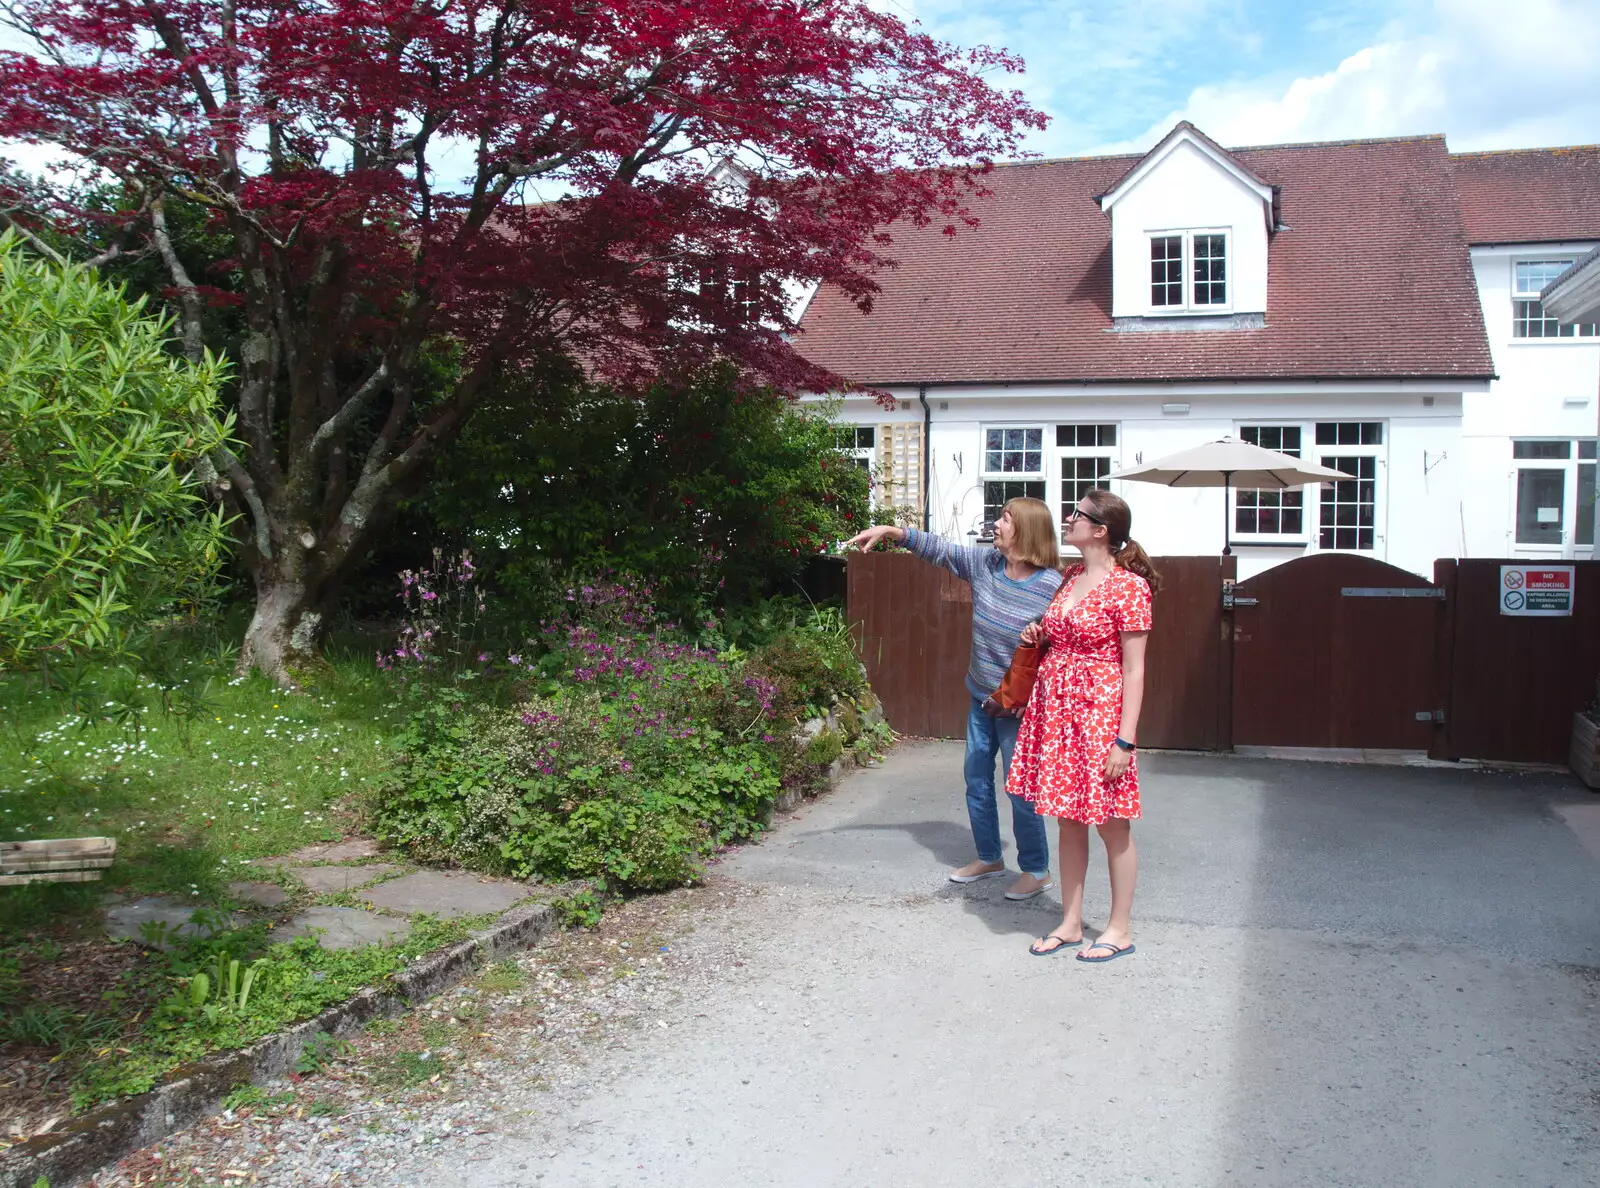 Mother shows off the gardens, from Chagford Lido and a Trip to Parke, Bovey Tracey, Devon - 25th May 2019